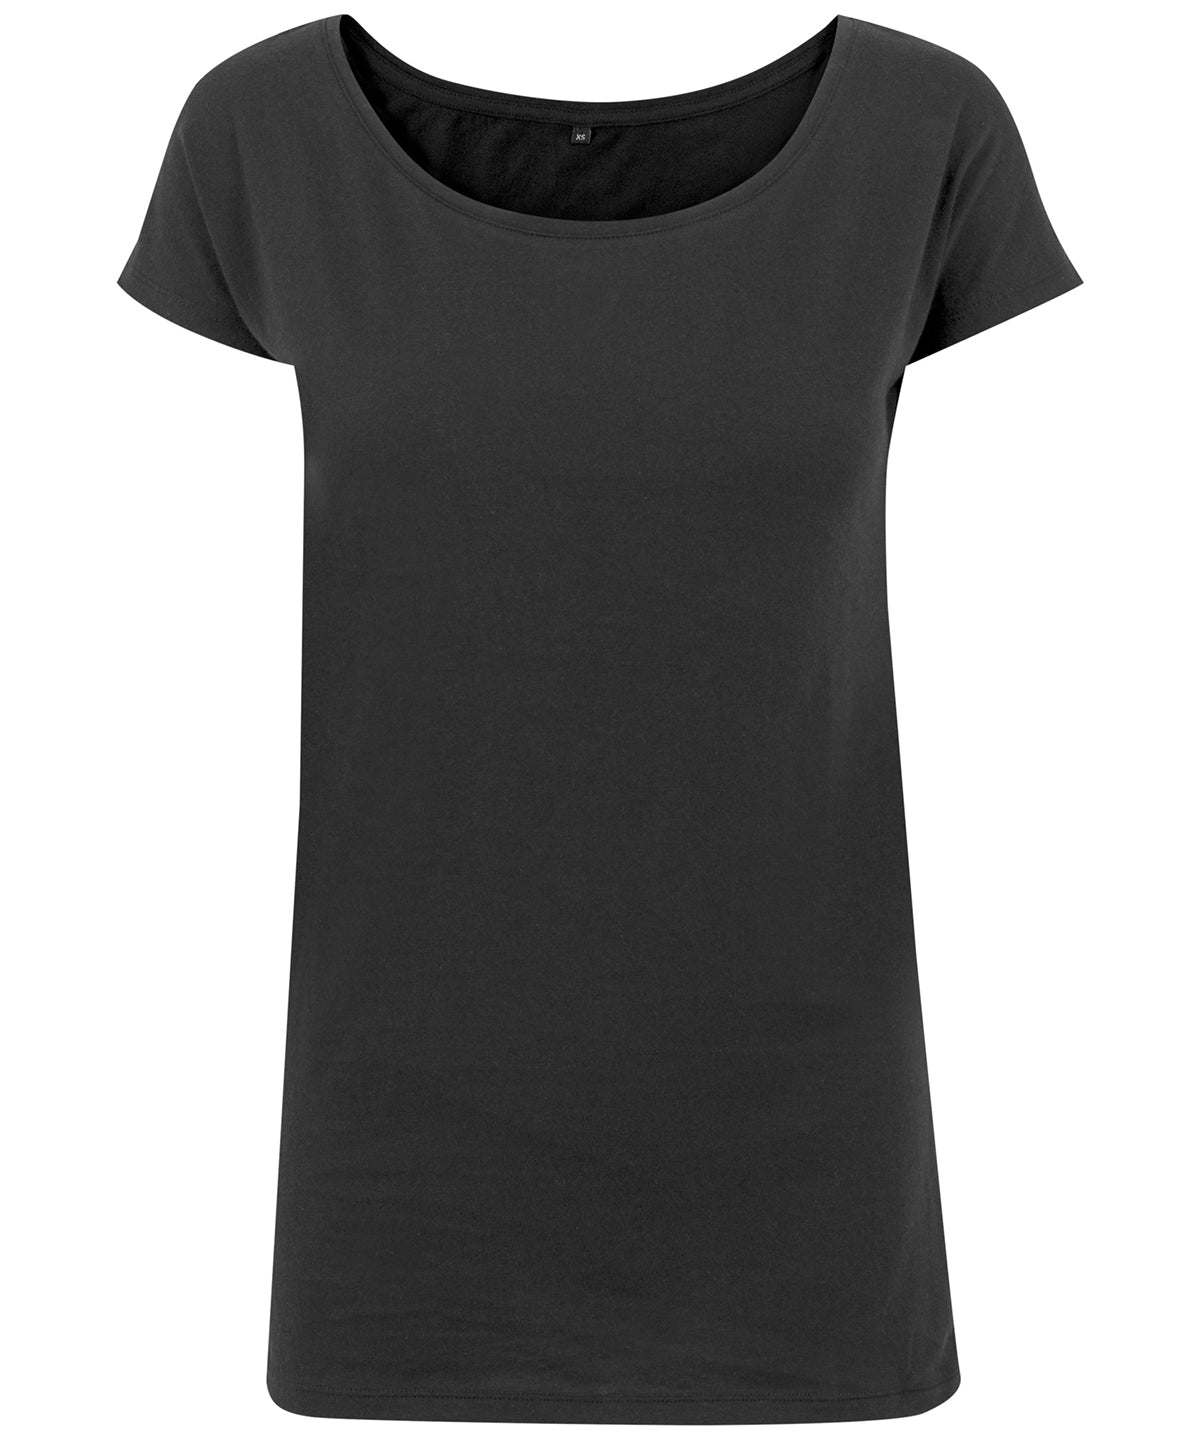 Personalised T-Shirts - Black Build Your Brand Women's wide neck tee